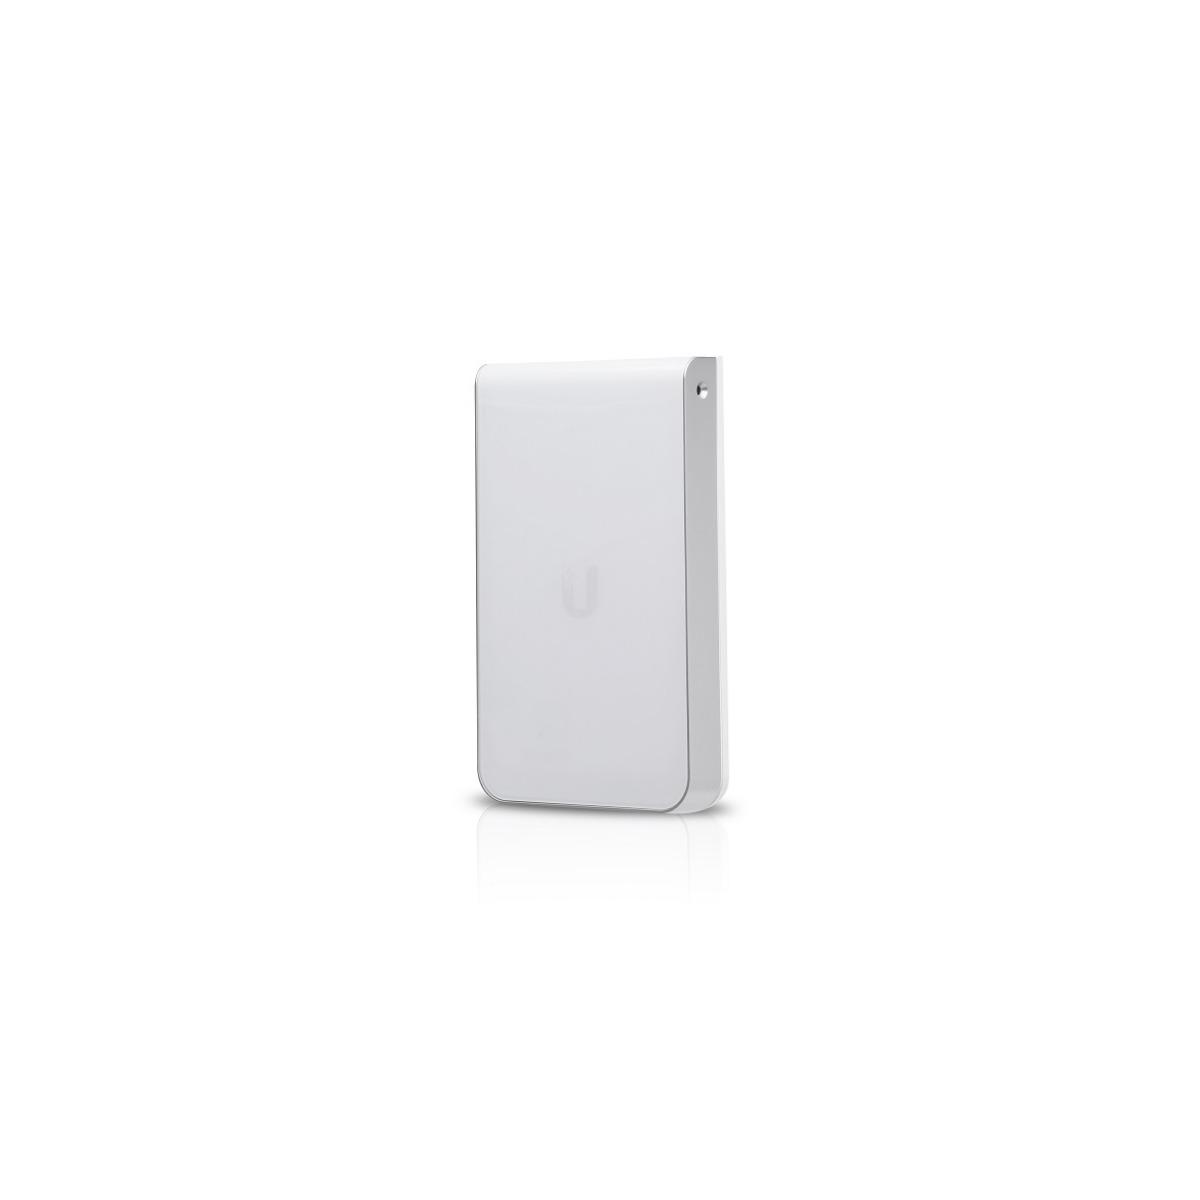 HD In-Wall WiFi Indoor Access 5 Point DualBand Ubiquiti UBIQUITI (UAP-IW-HD) Point UniFi Access